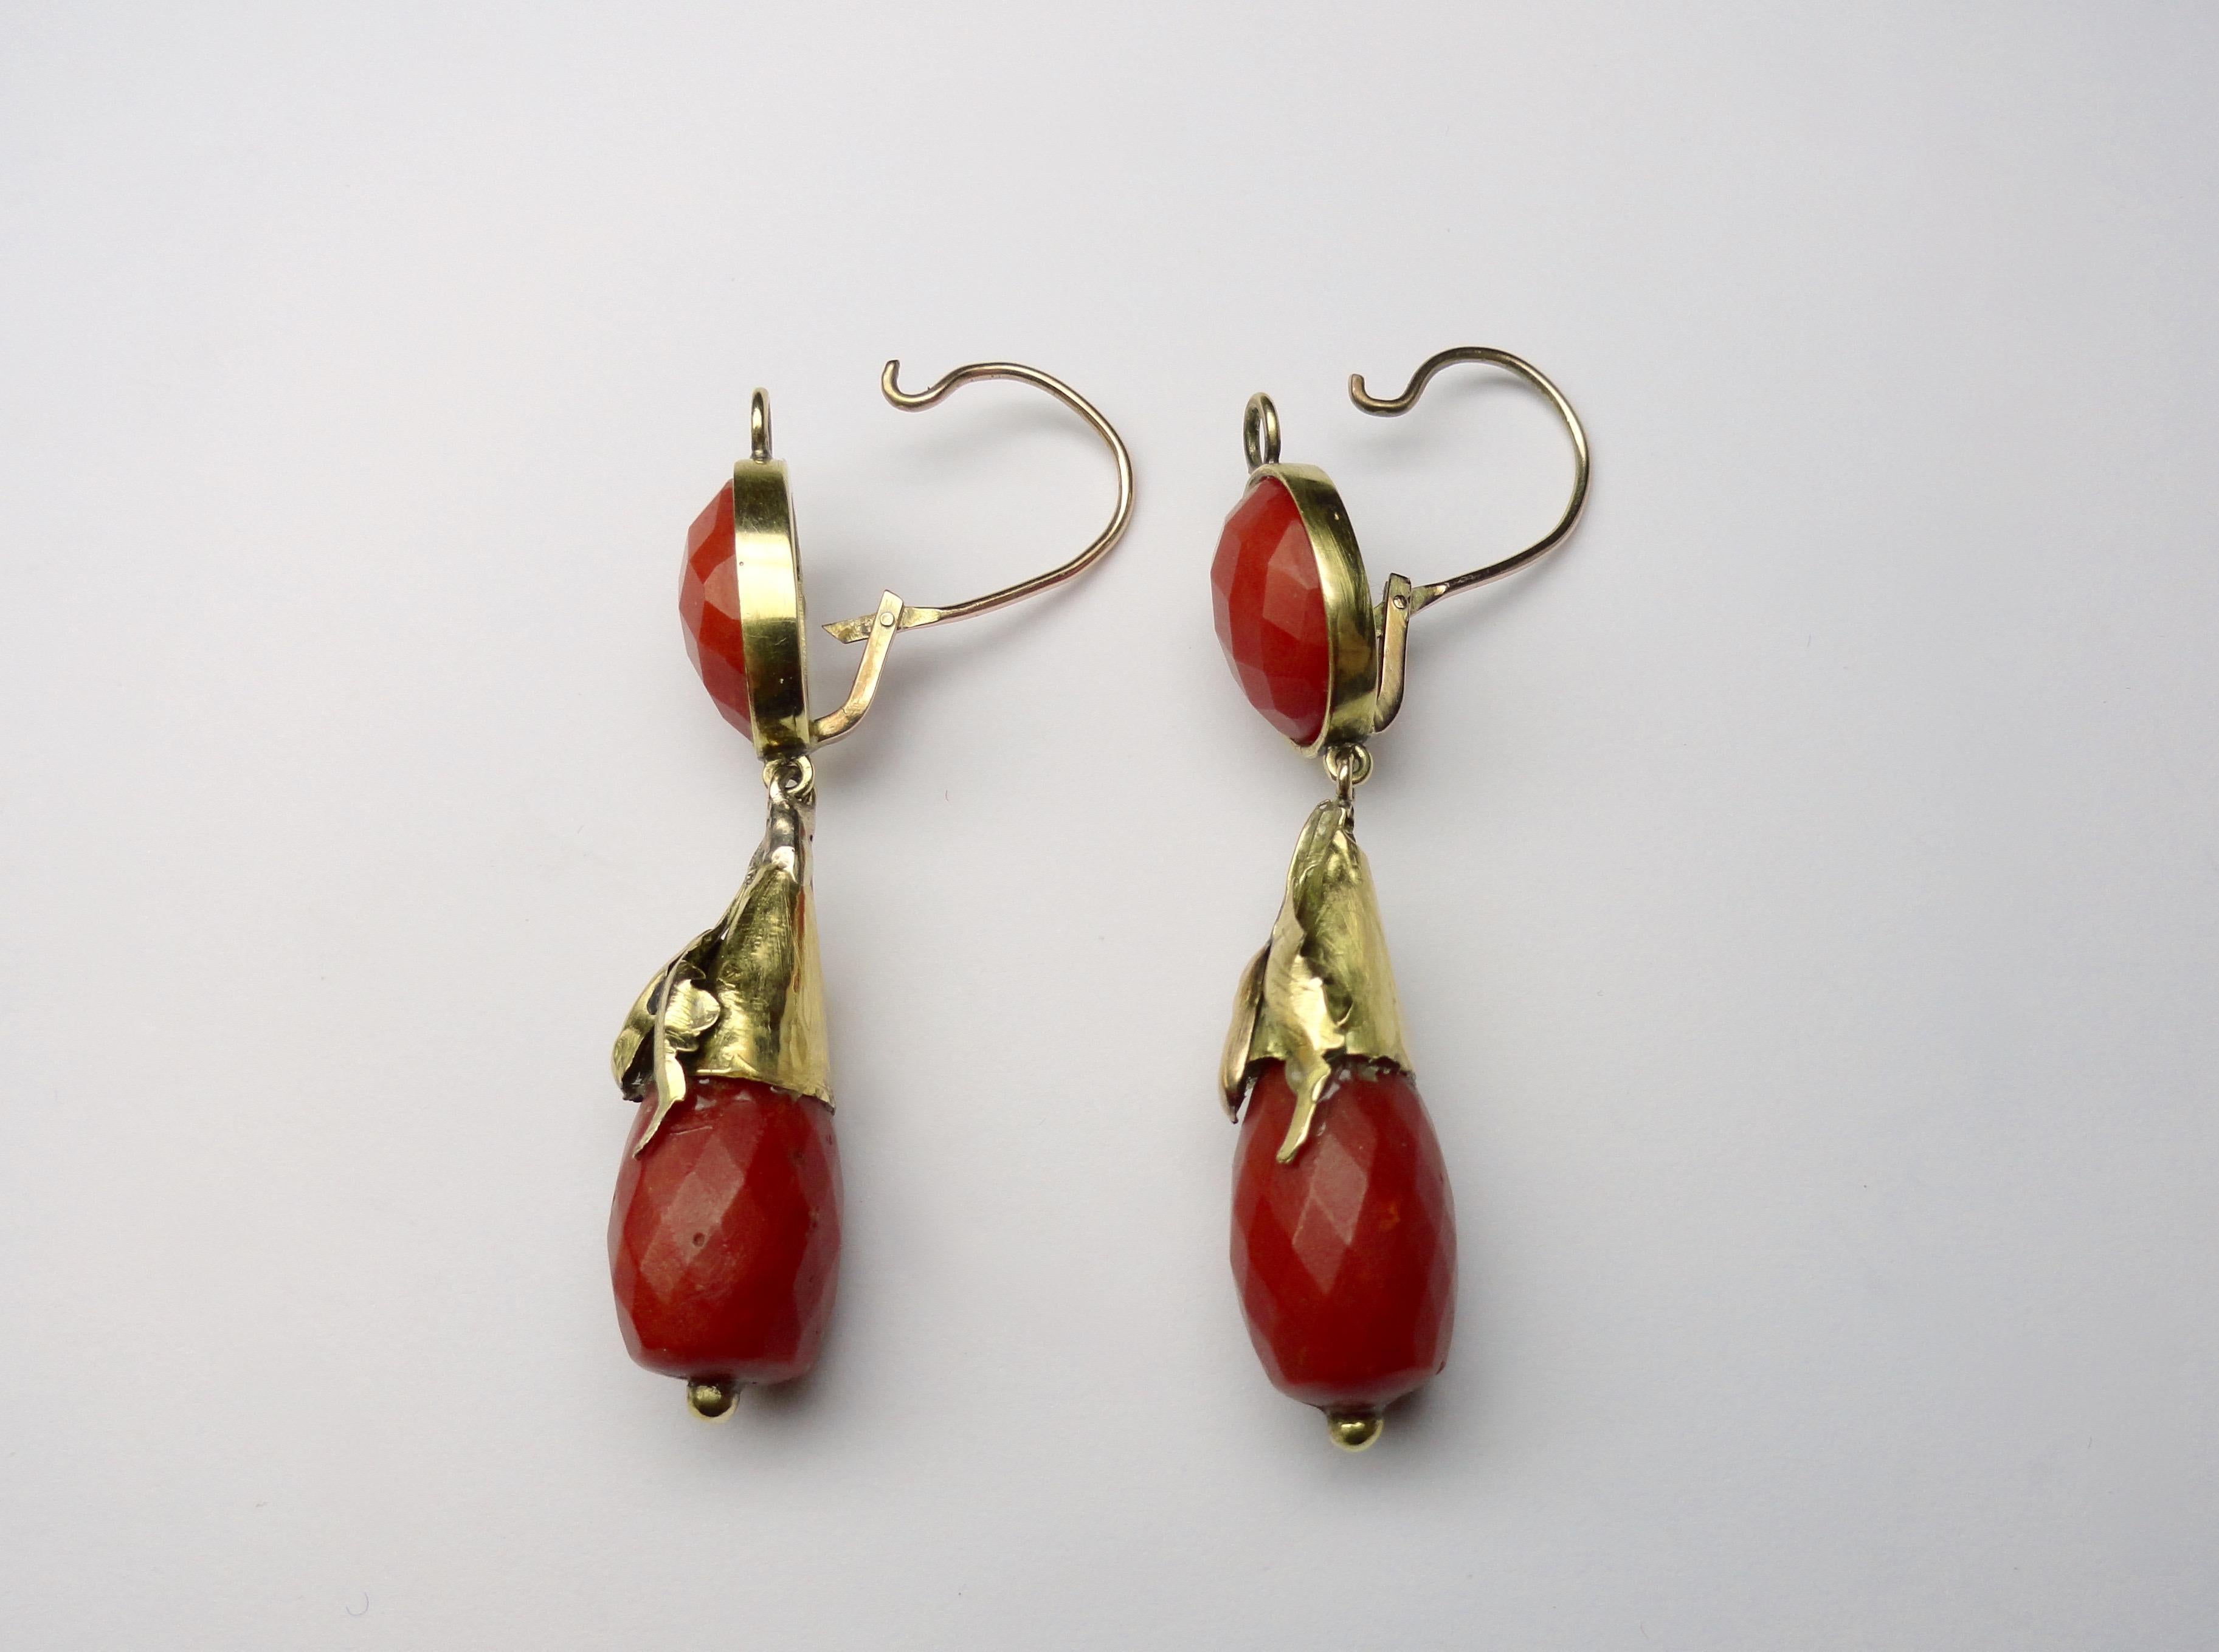 Antique faceted coral pendant earrings mounted in 18KT gold. Mid 19th Century, Italian.